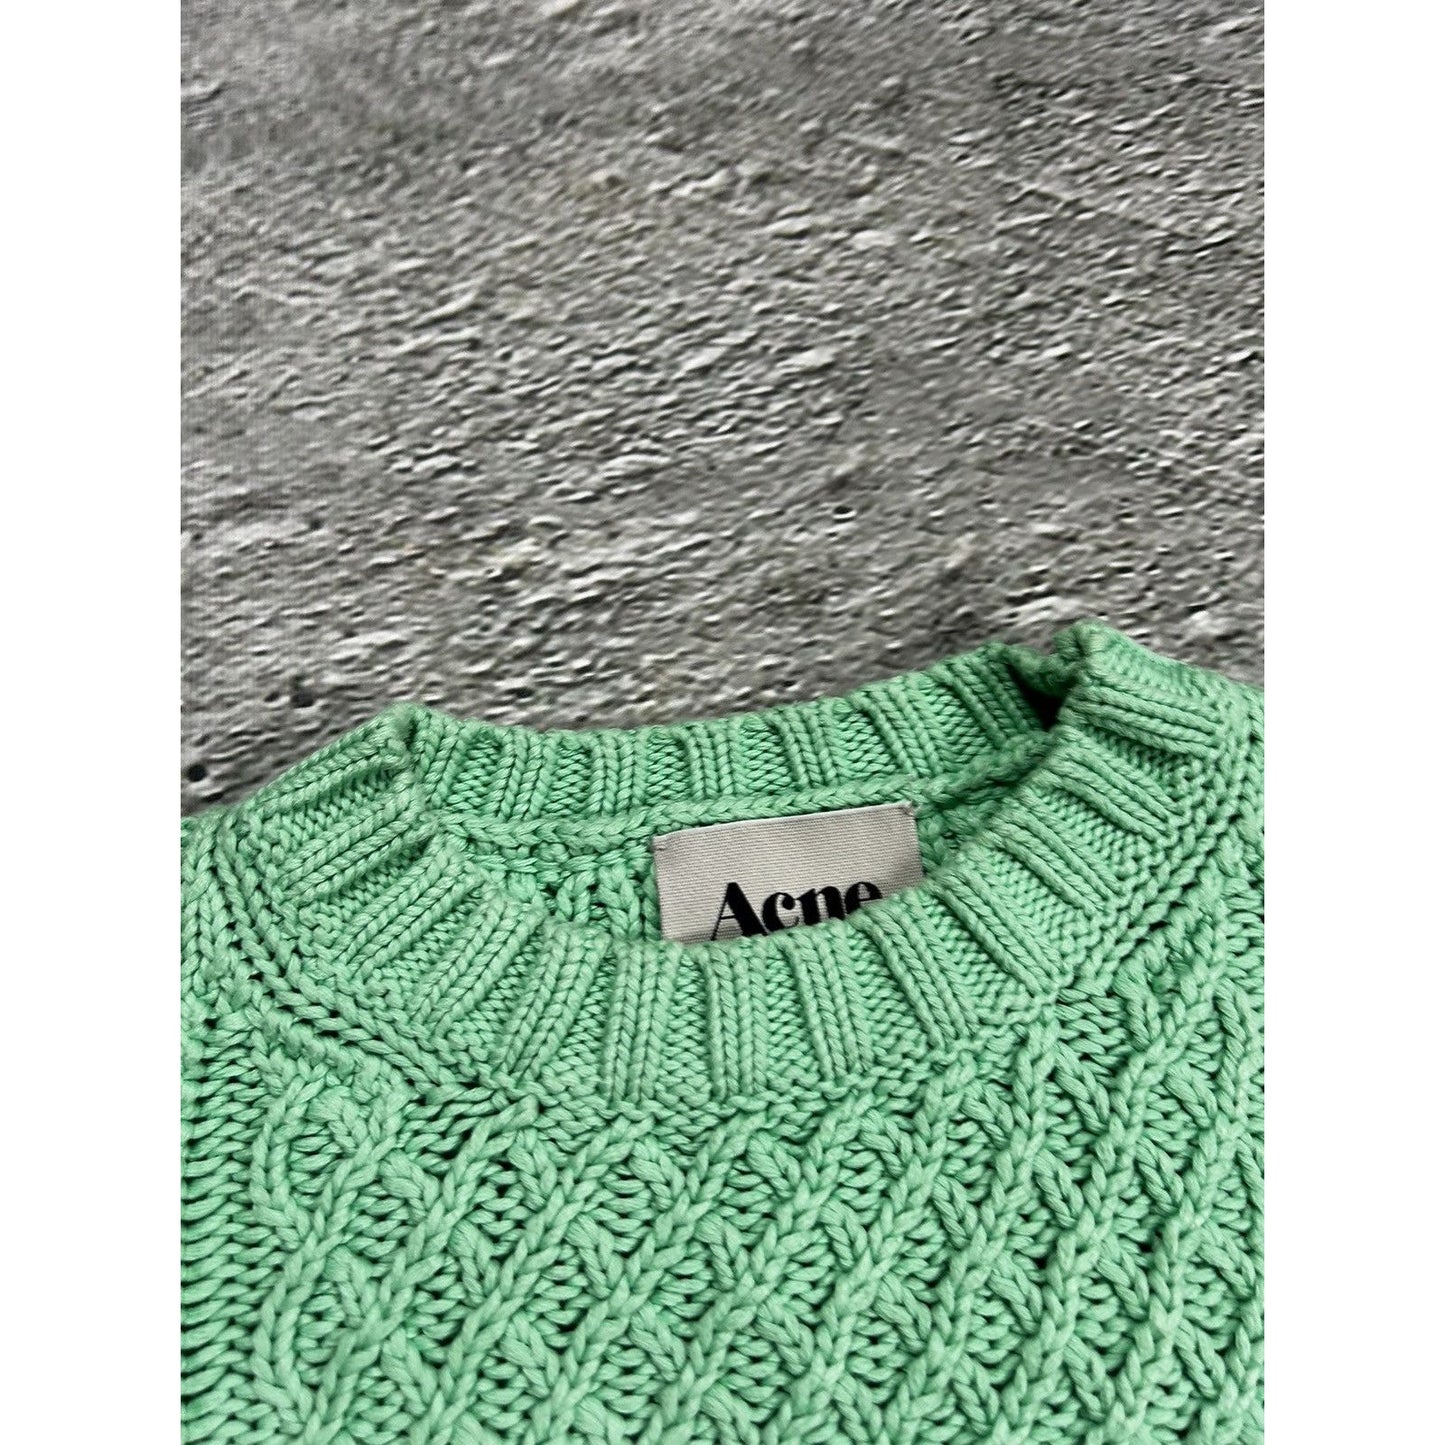 Acne Lia Cable SS12PRE sweater Kanye West knit